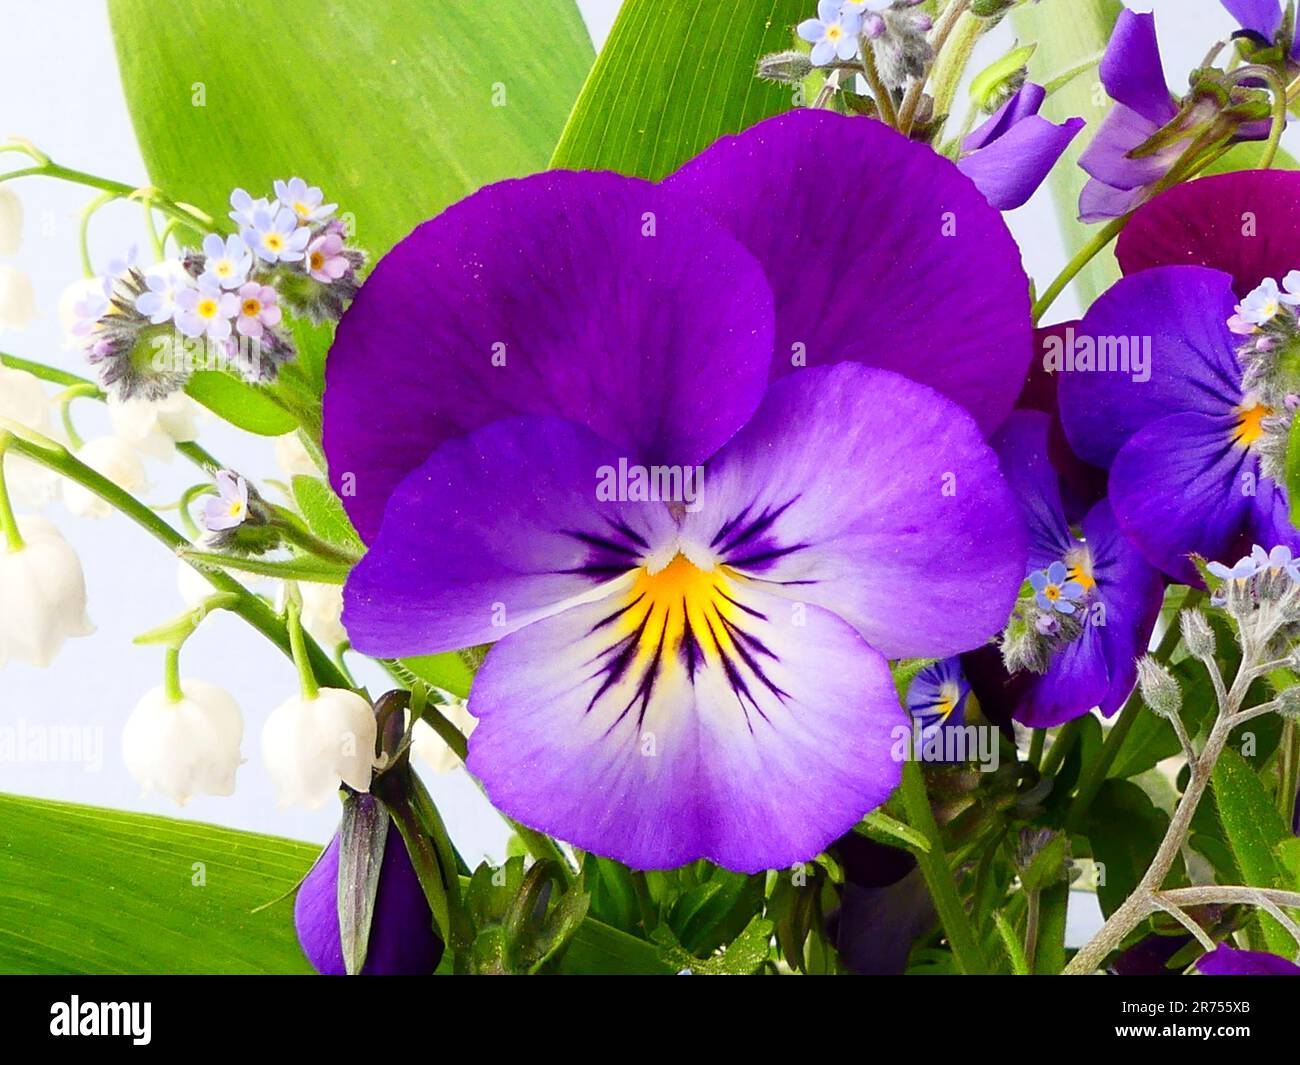 Flower bouquet with violets Stock Photo - Alamy